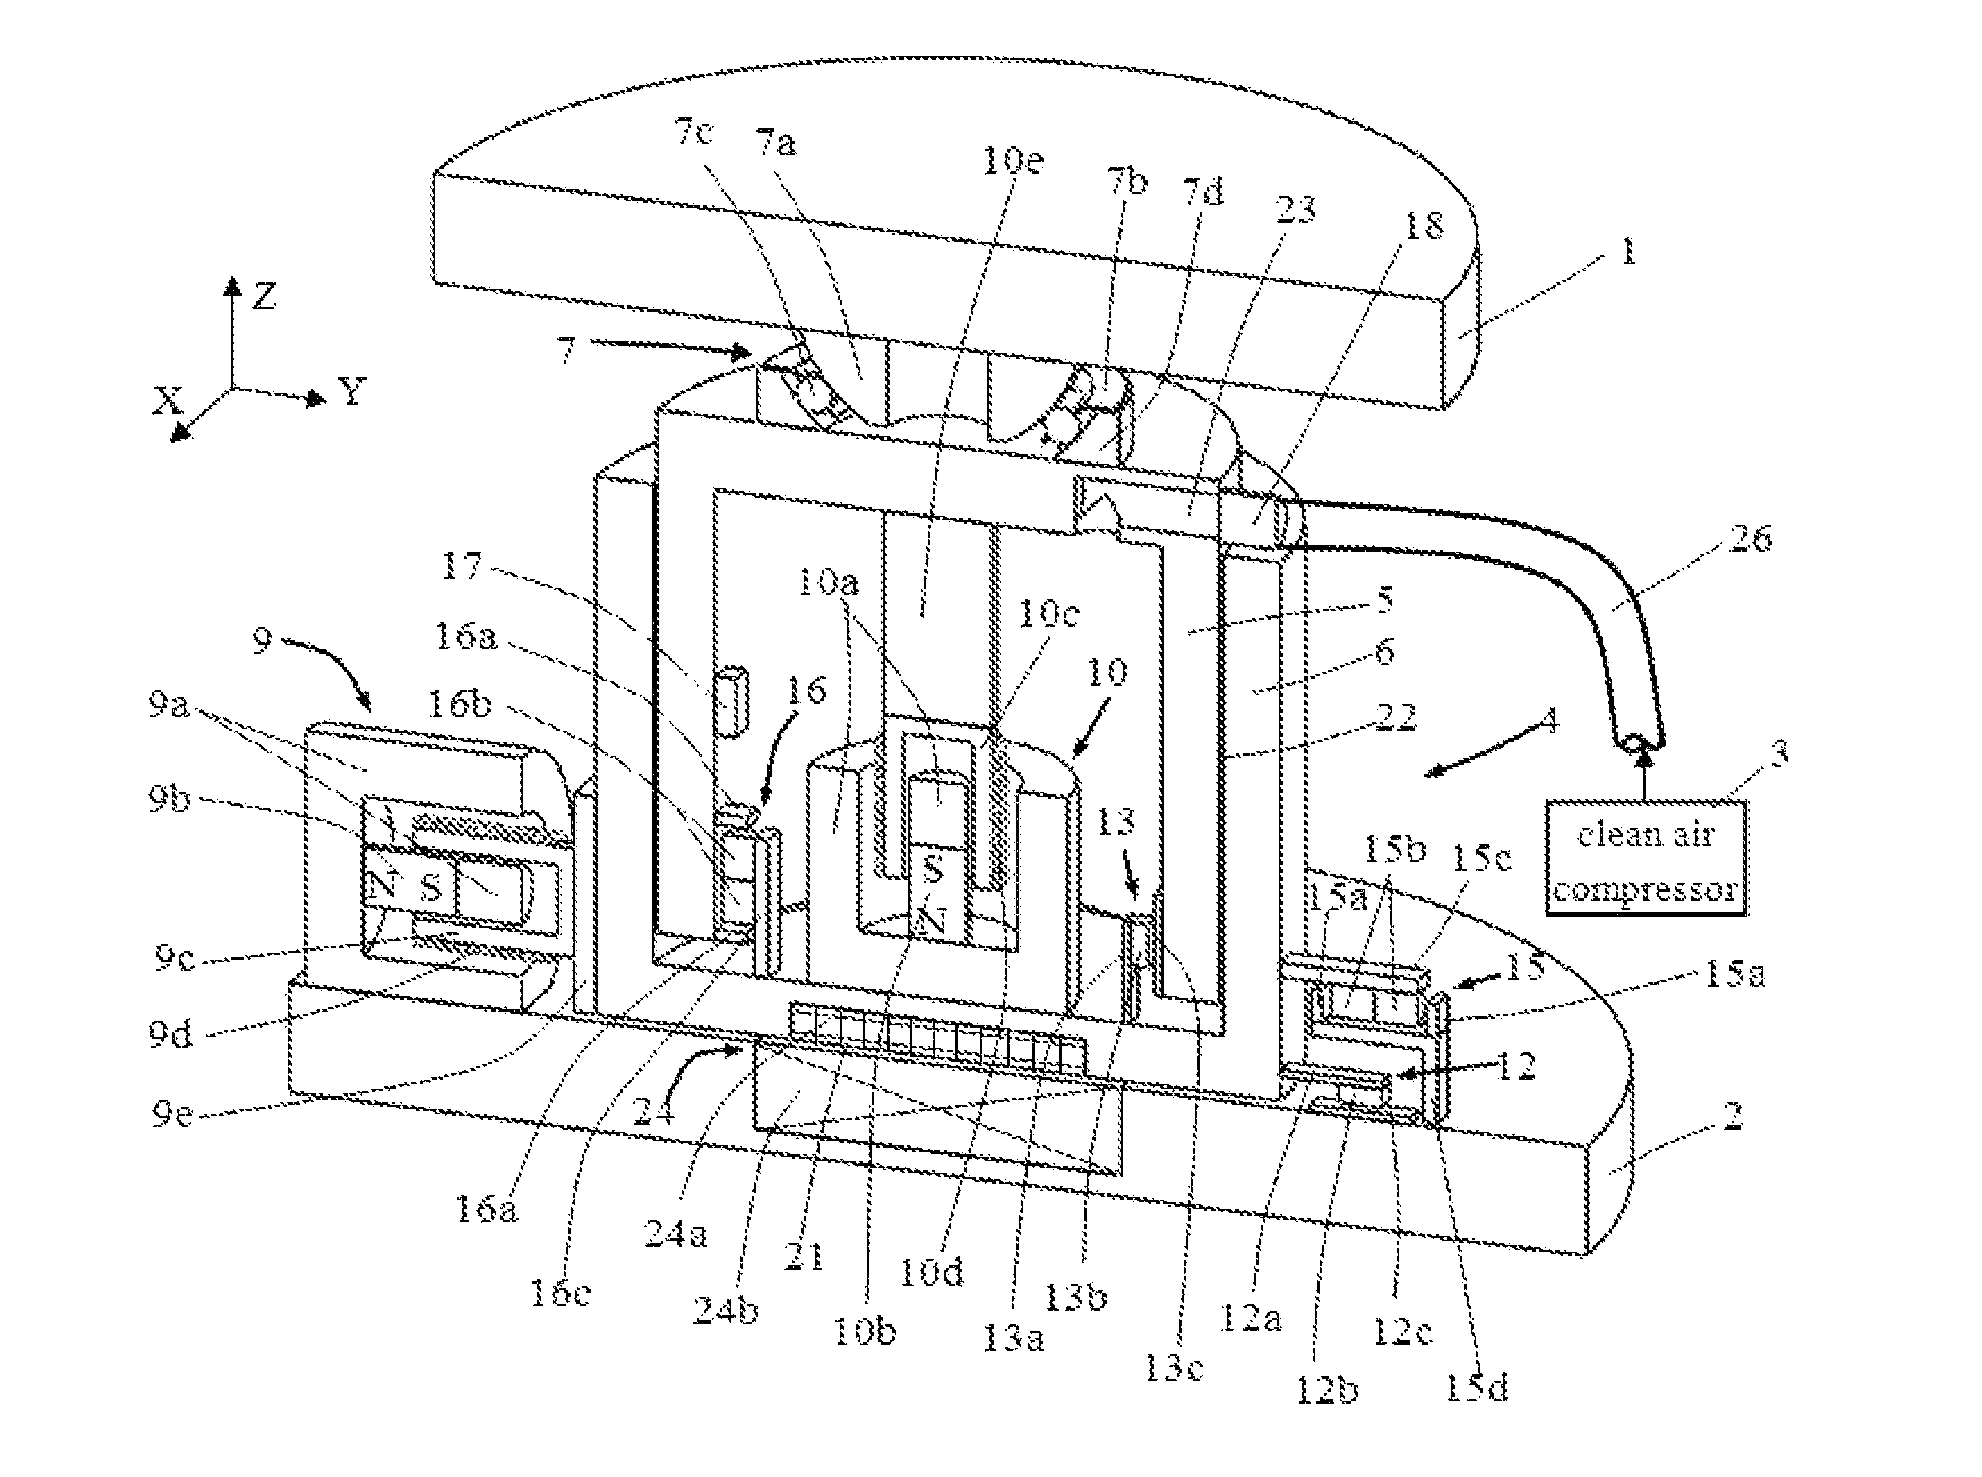 Magnetically suspended vibration isolator with zero stiffness whose angle degree of freedom is decoupled with a joint ball bearing